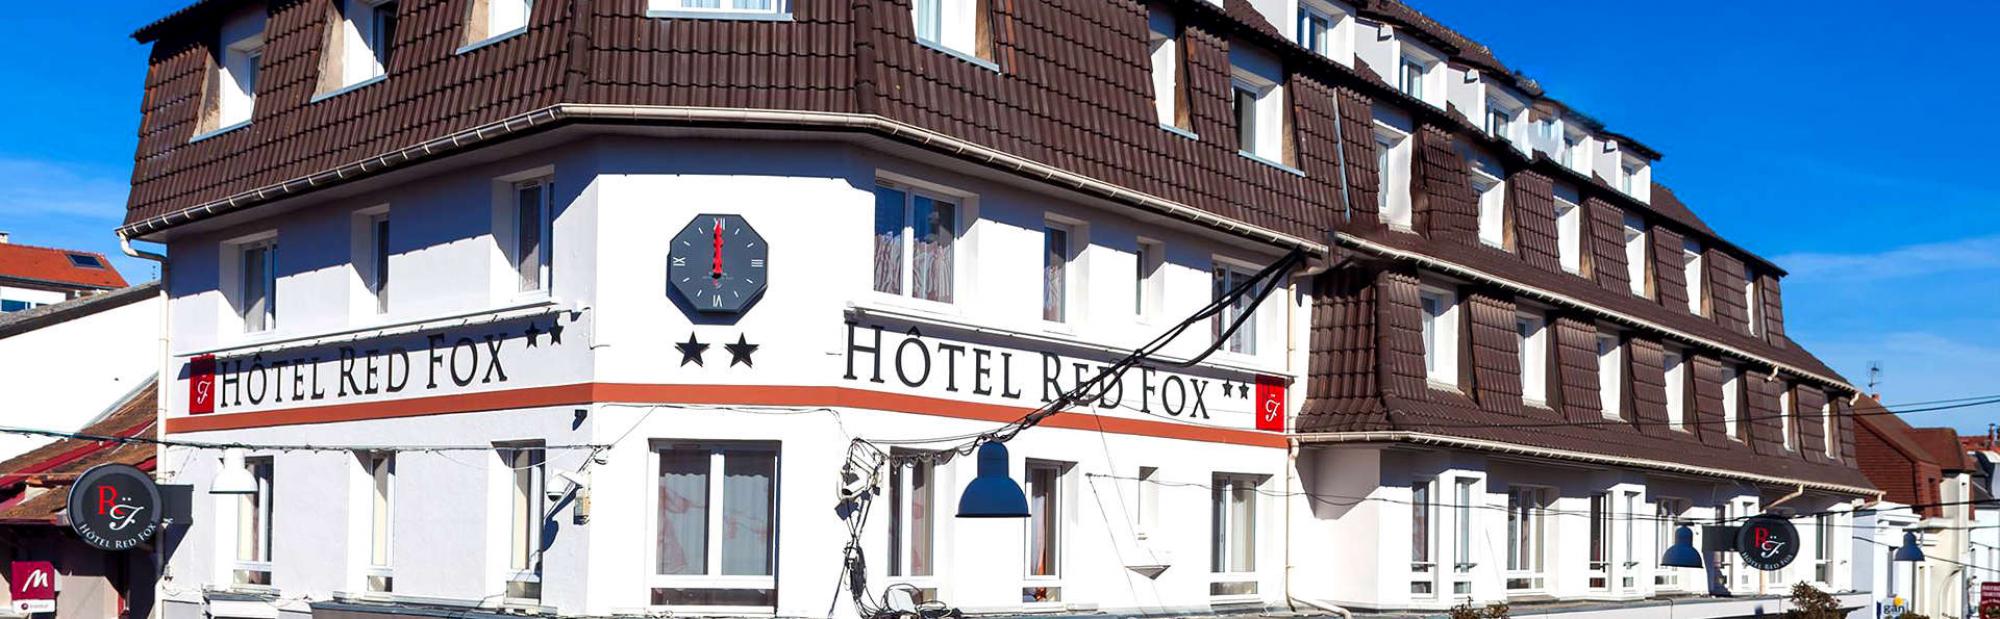 Hotel Red Fox  Le Touquet